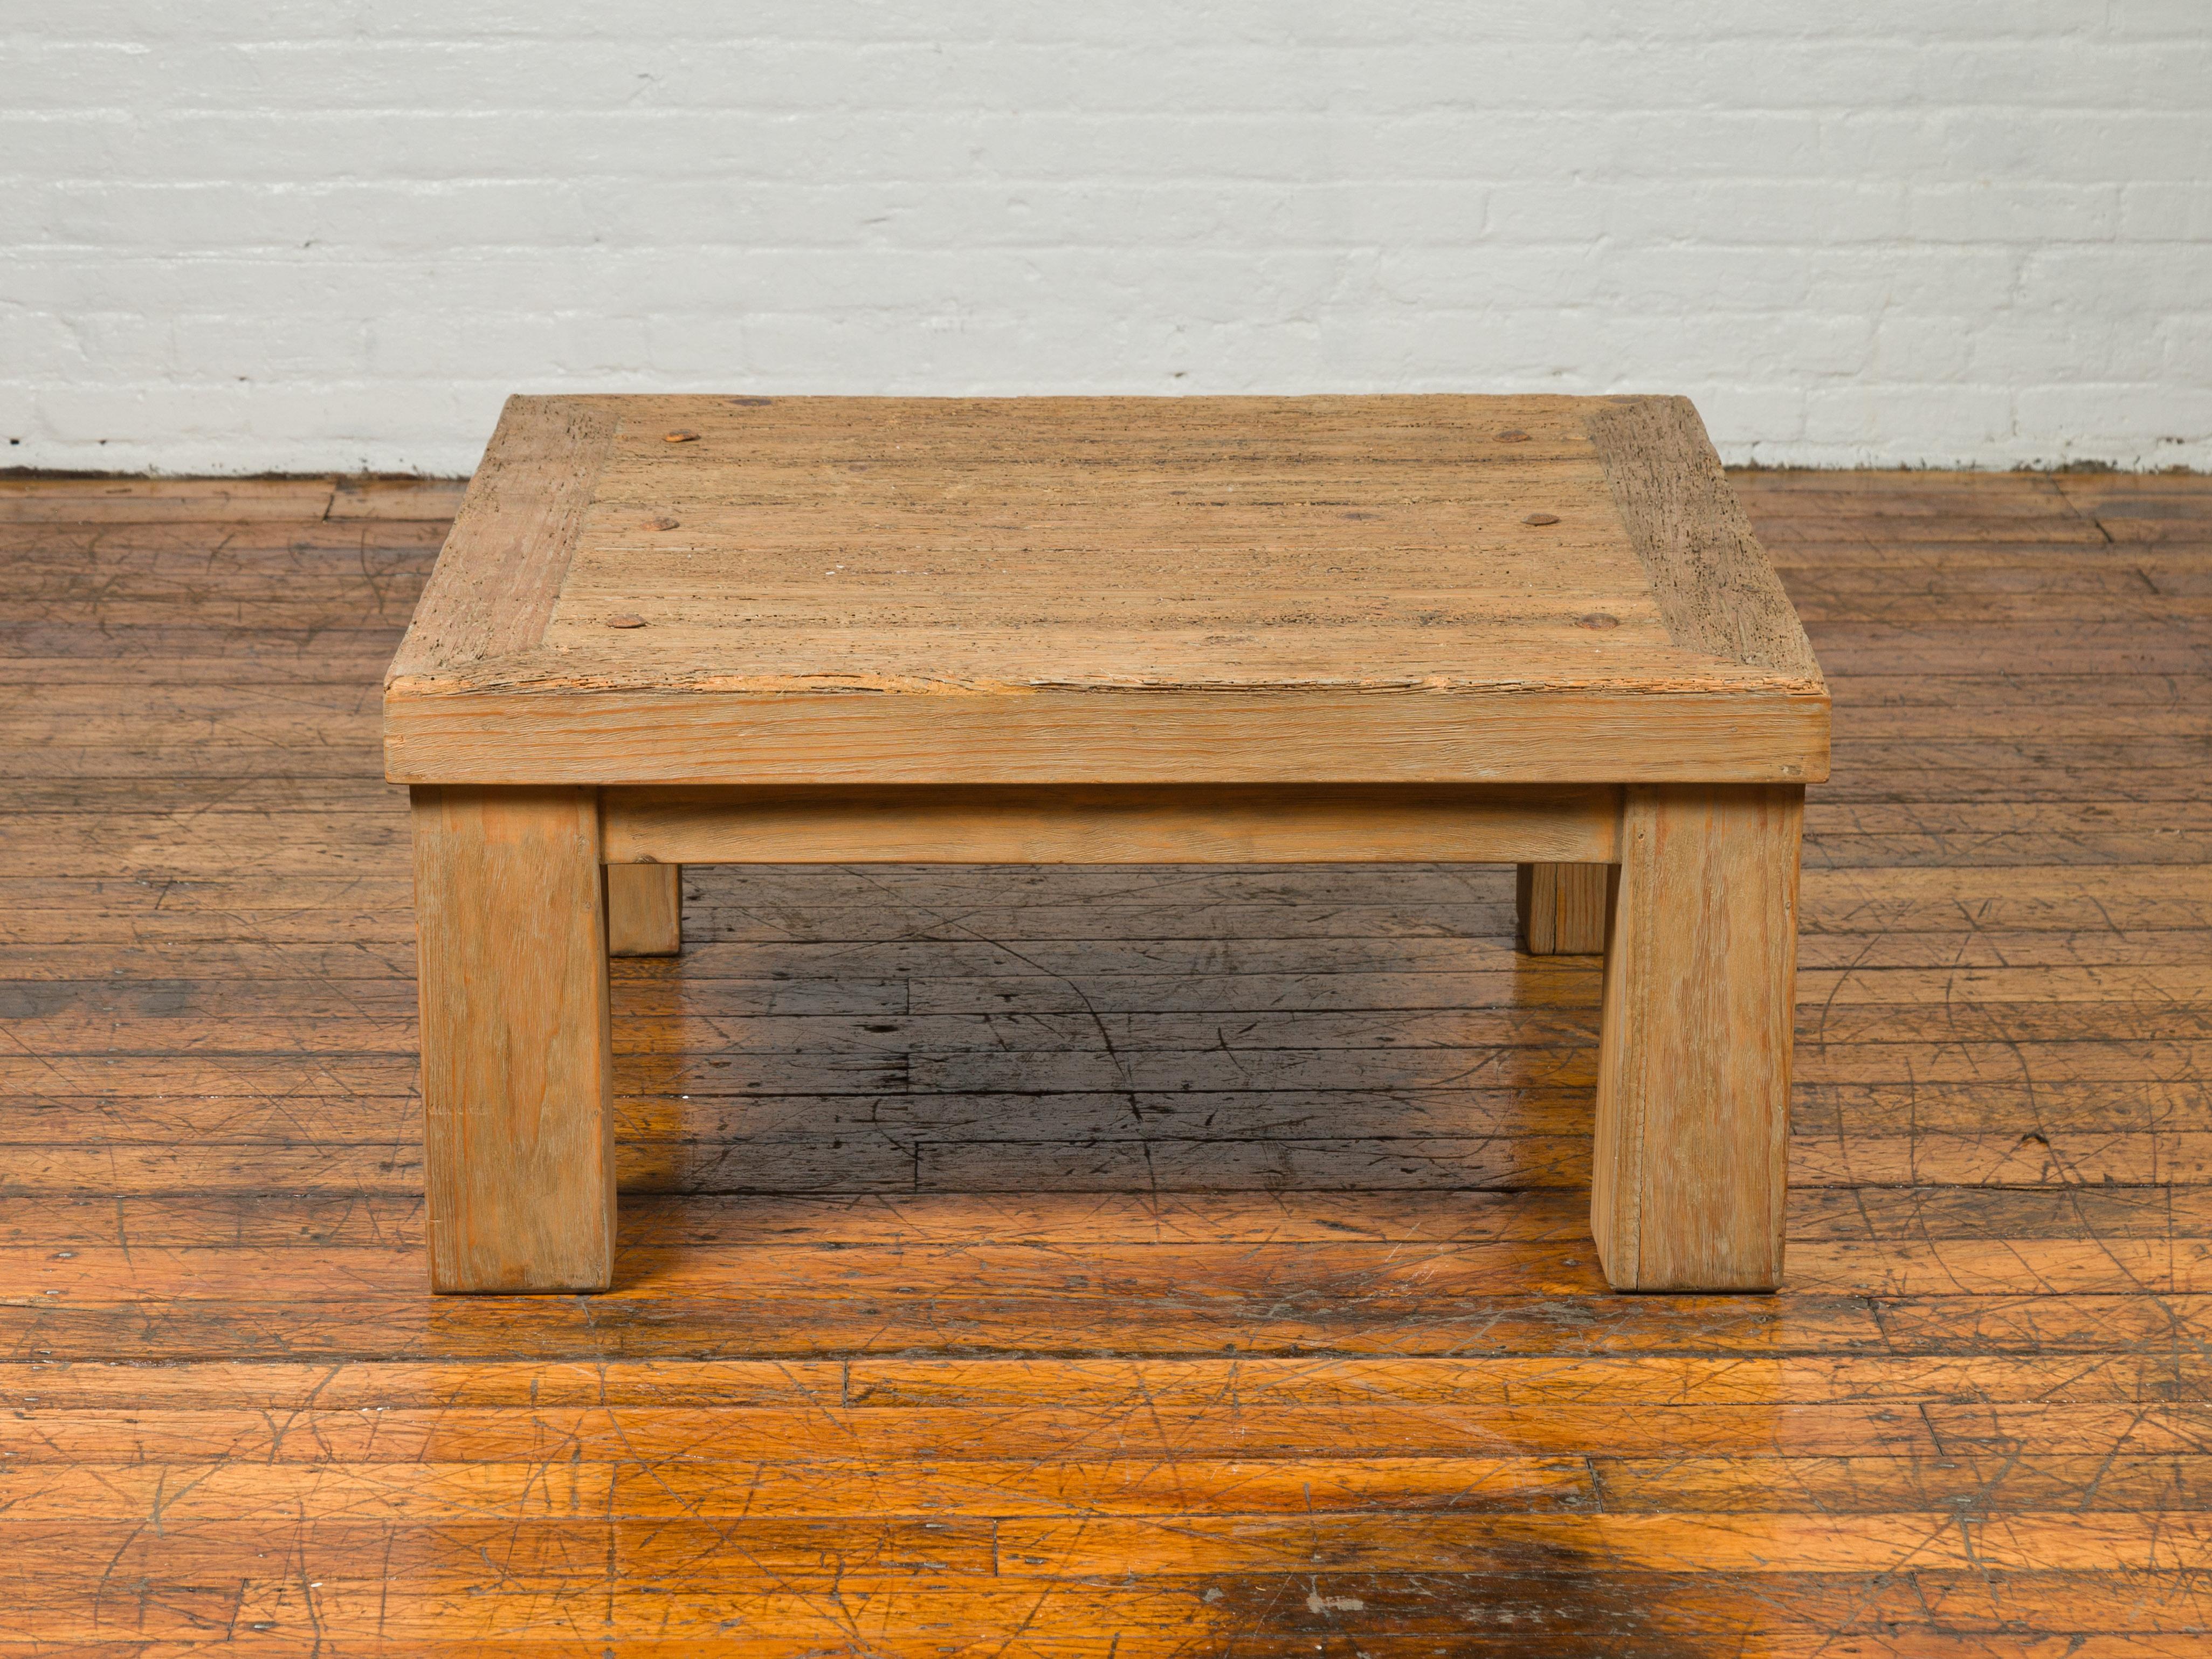 Vintage Driftwood Midcentury Coffee Table from Mexico with Square Legs 4